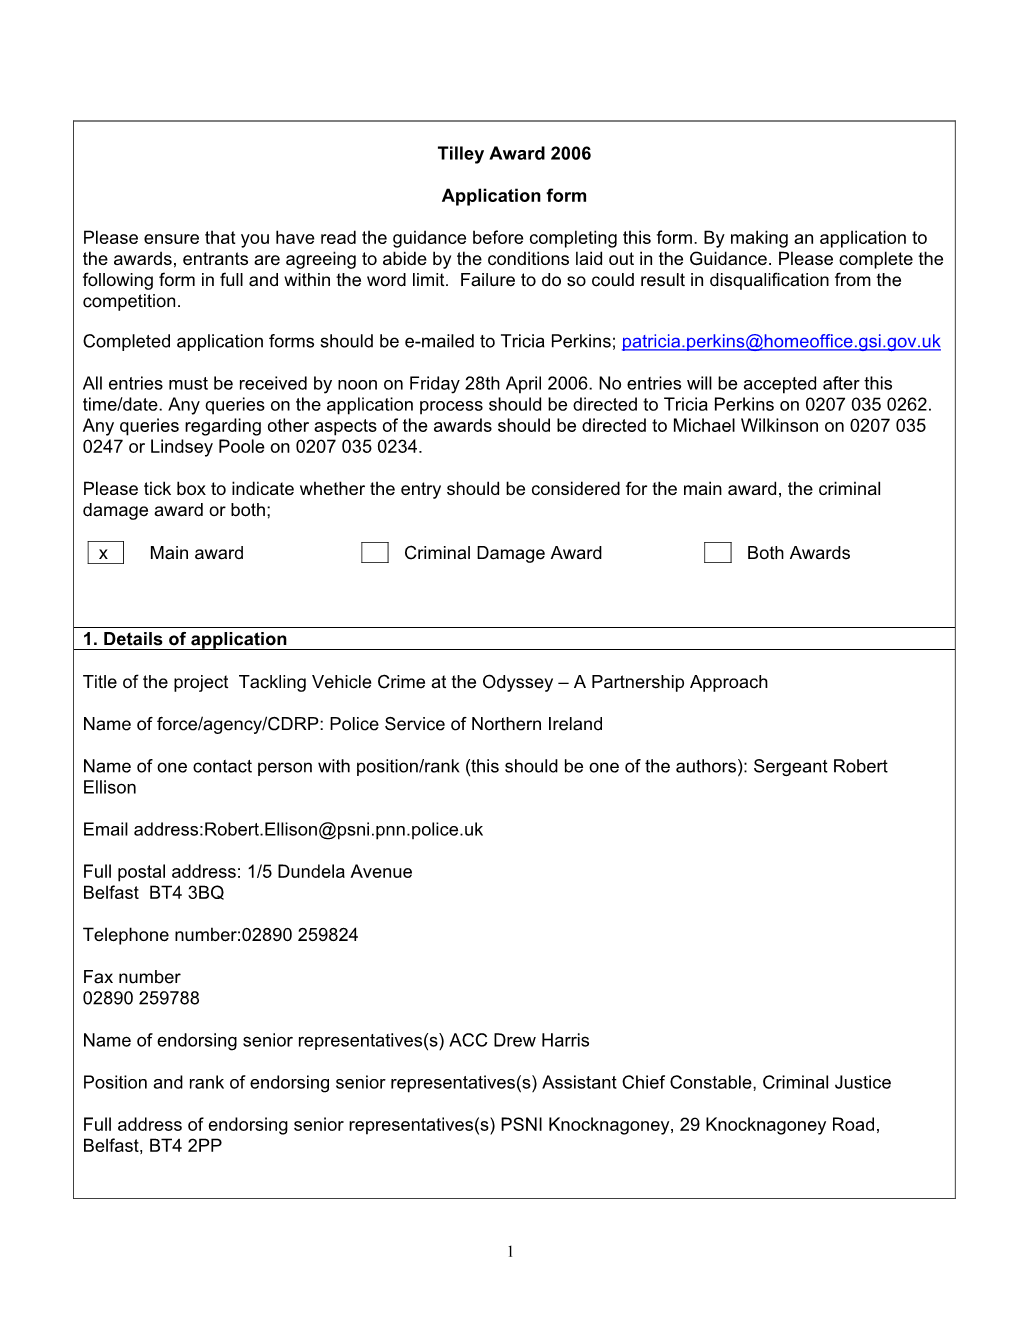 Tilley Award 2006 Application Form Please Ensure That You Have Read